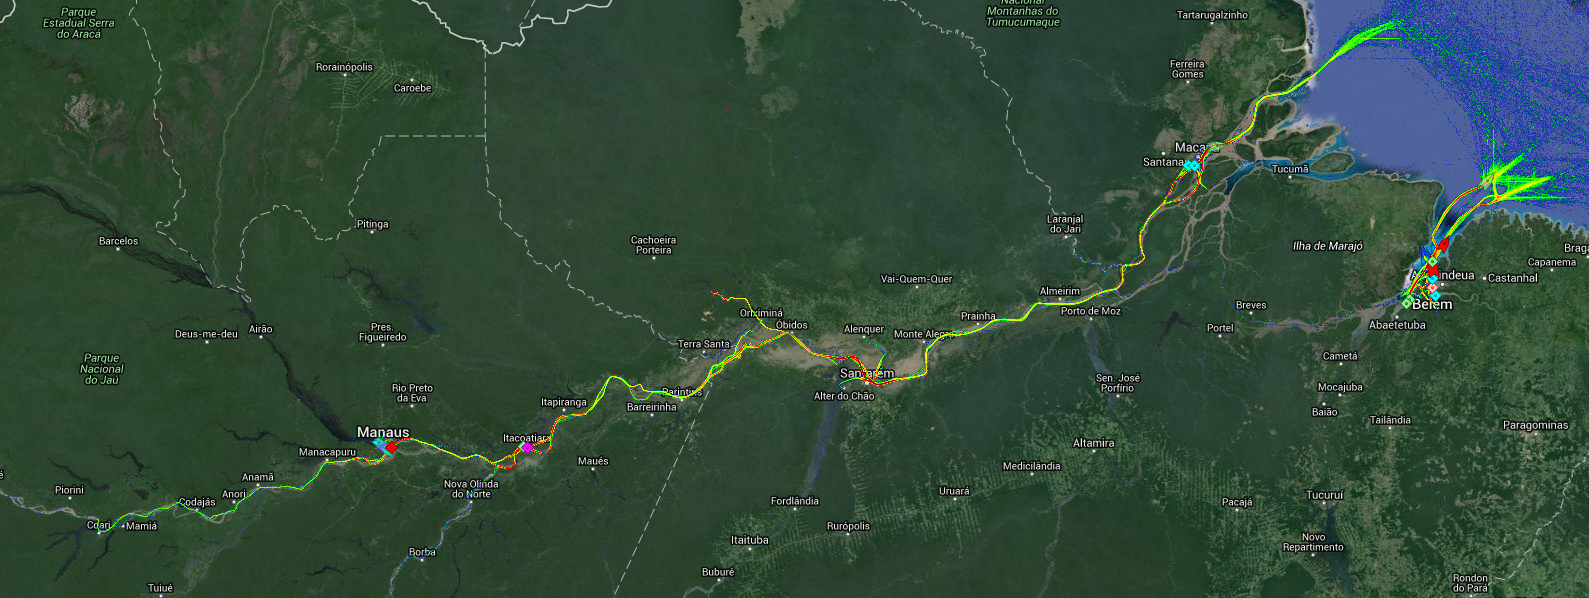 Live Marine Traffic, Density Map and Current Position of ships in AMAZON RIVER